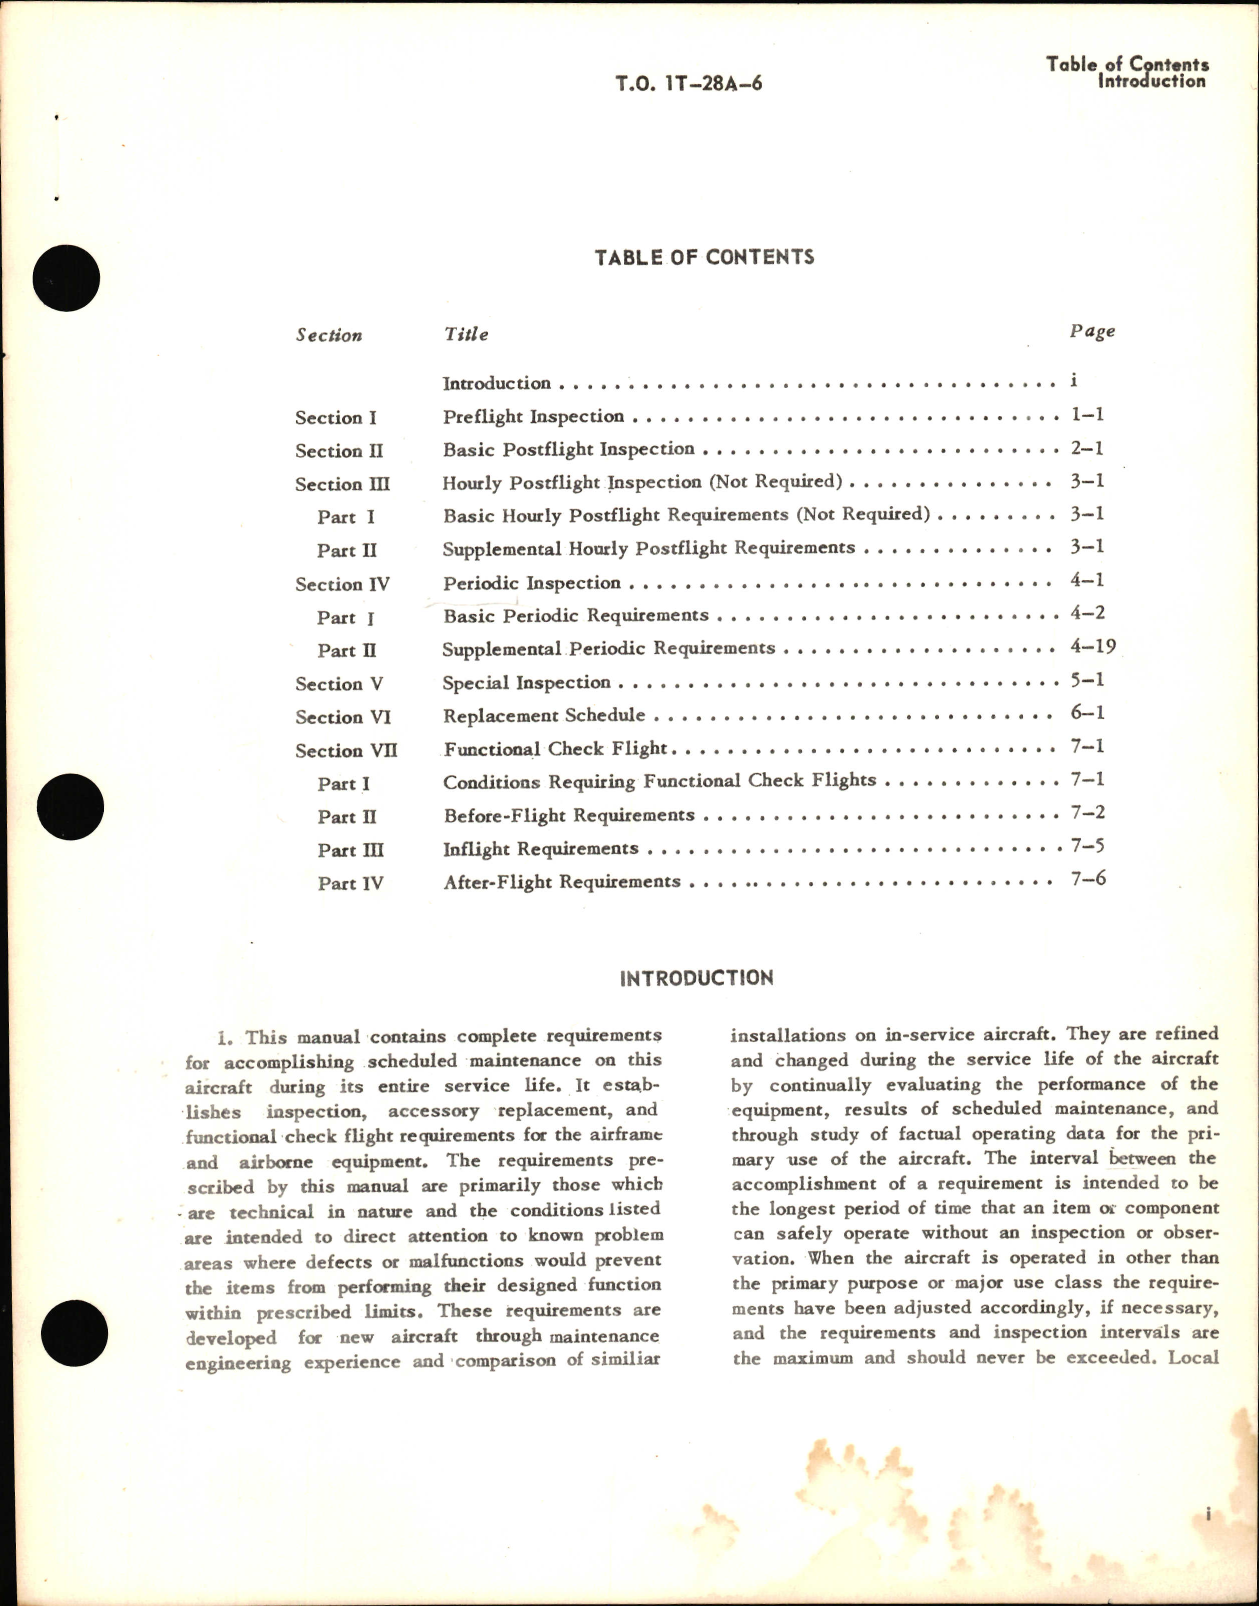 Sample page 3 from AirCorps Library document: Inspection Requirements Manual for T-28A